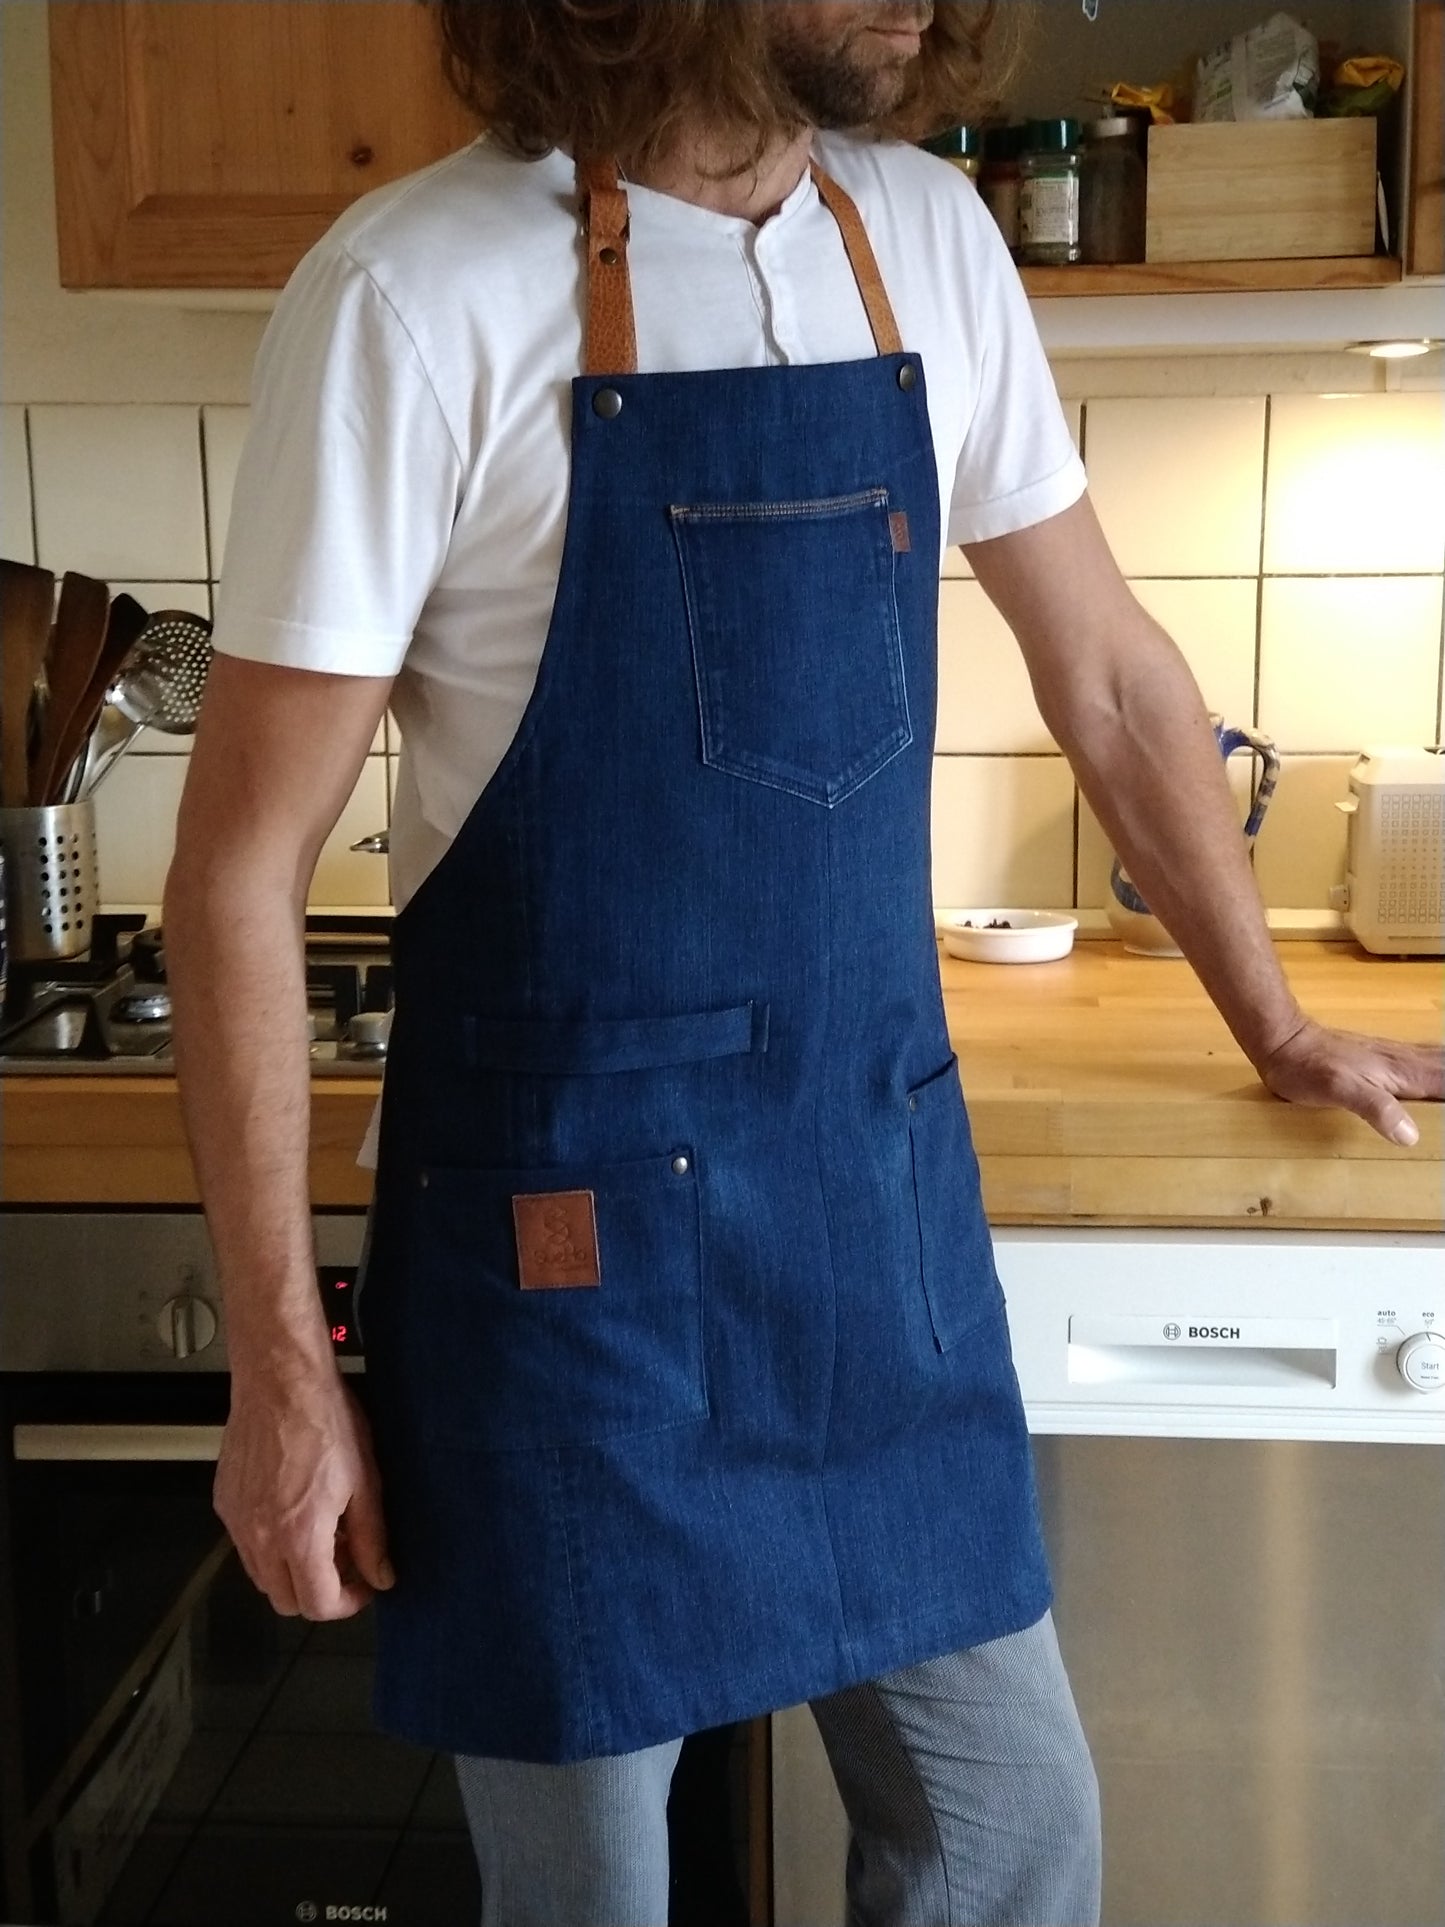 Cooking apron / grill apron made of denim medium blue with removable leather straps